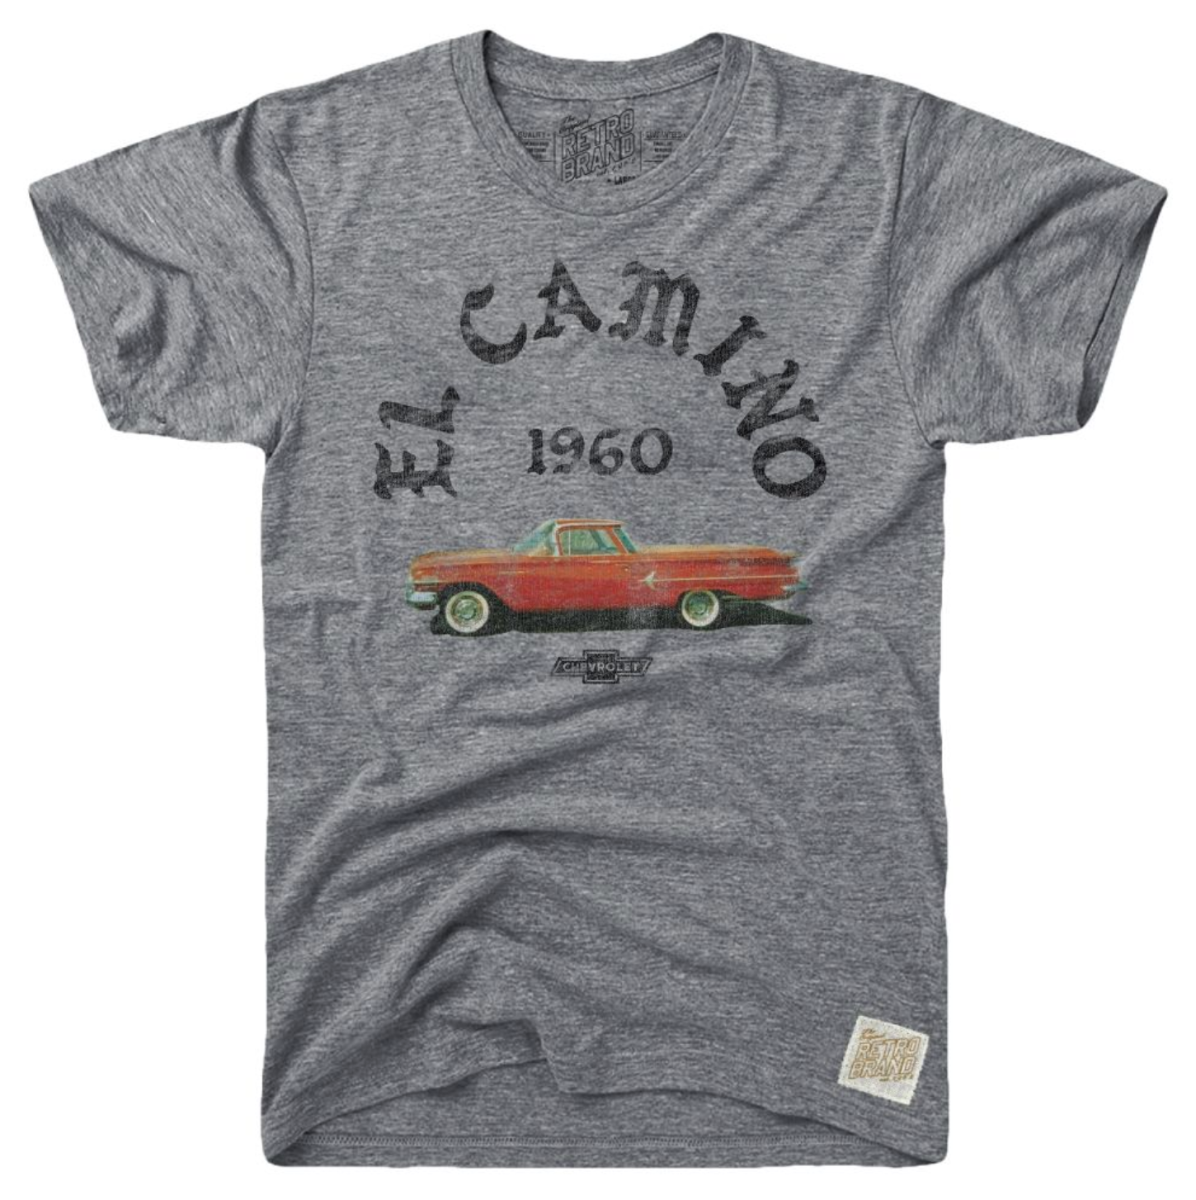 El Camino arch type with 1960 centered in black print with the vintage red car below and a small chevrolet emblem below that on our tri-blend unisex tee in streaky gray